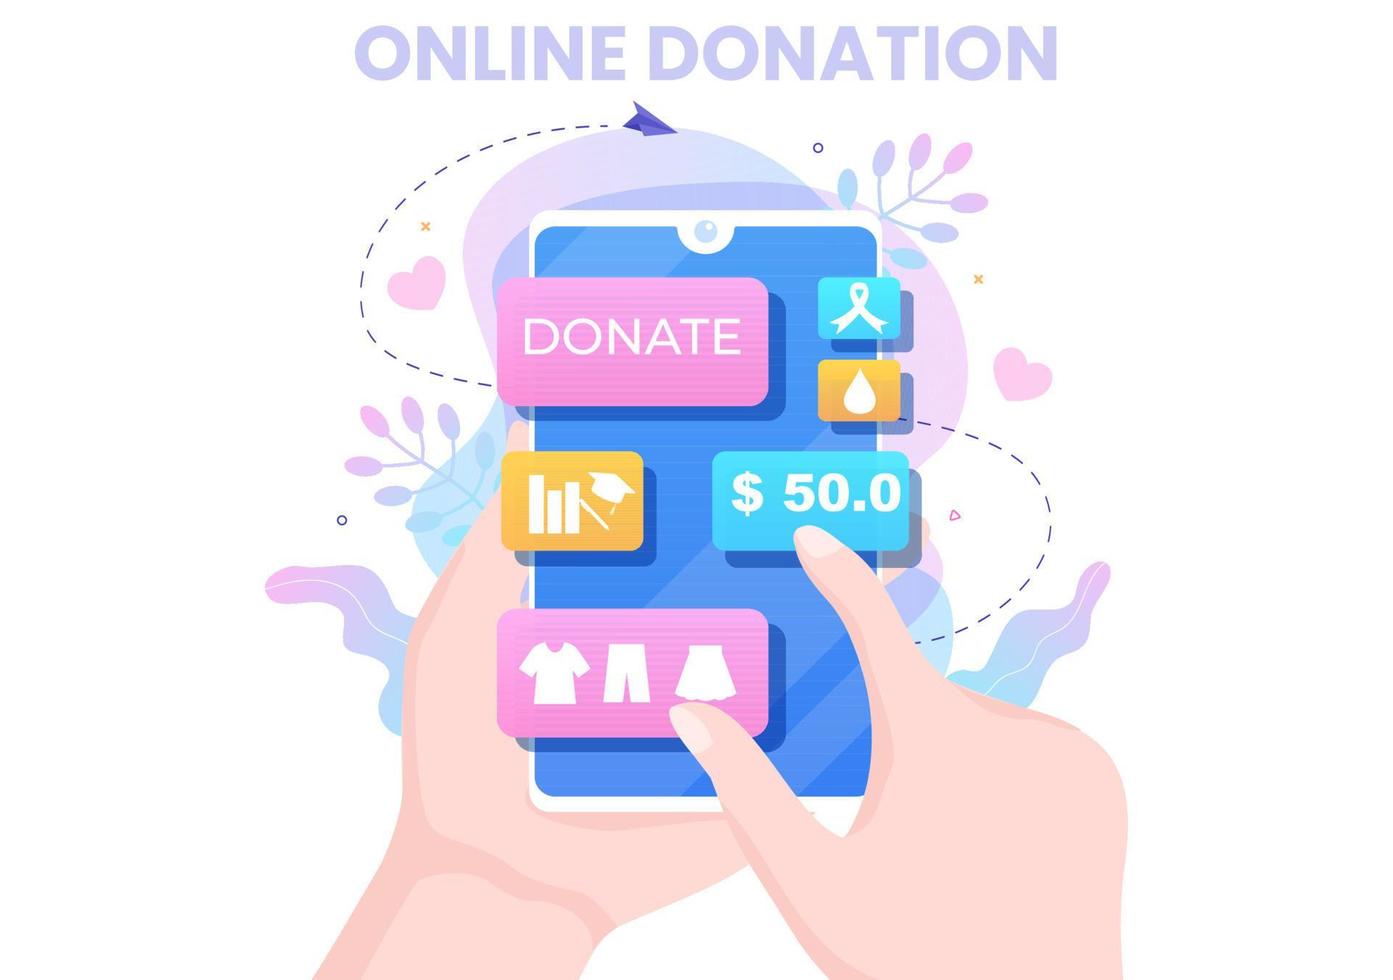 Love Charity or Online Giving Donation via Volunteer Team Worked Together to Help and Collect Donations for Poster or Banner in Flat Design Illustration vector